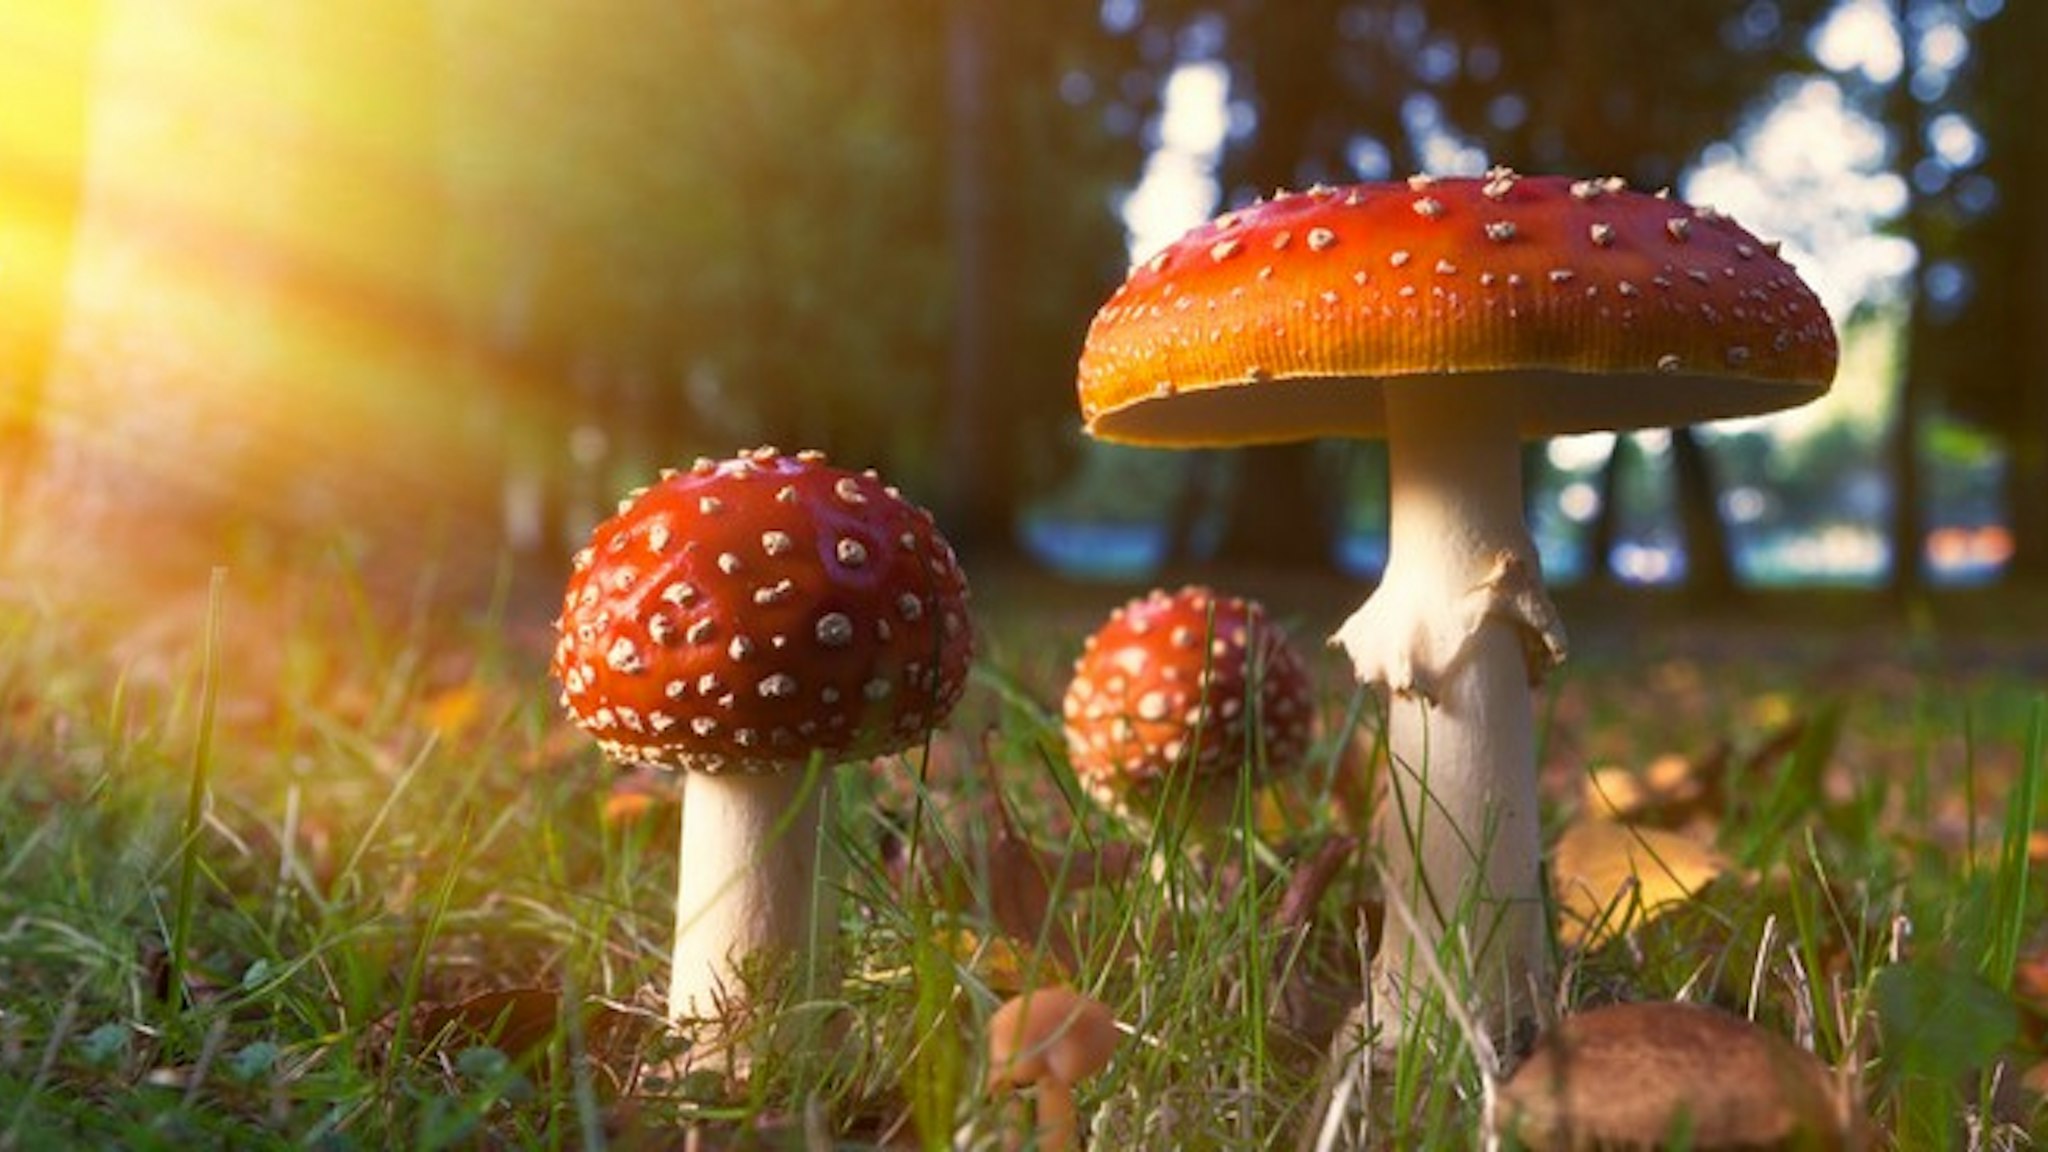 Quintessential red mushroom (Amanita muscaria) often seen in children fairy-tale books, in bright golden light on grass ground in the woods with golden maple leaves around.